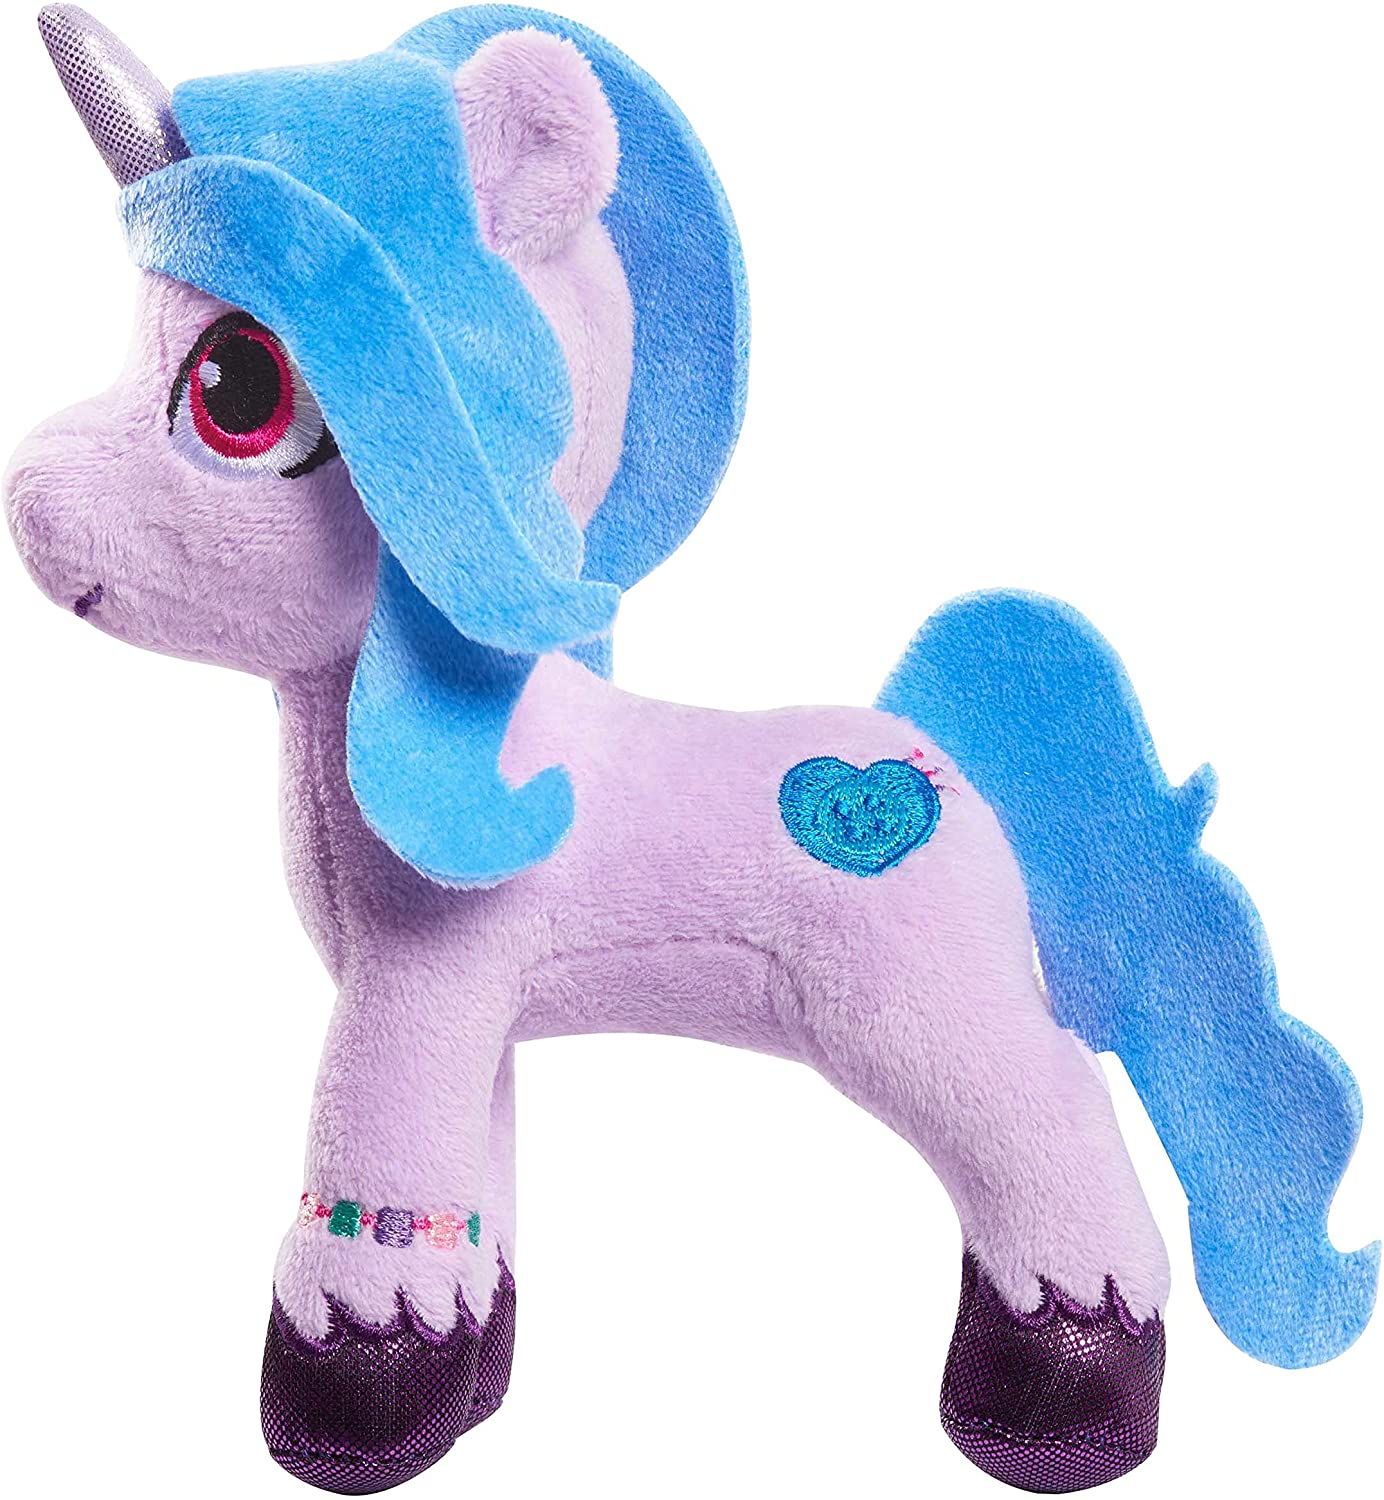 MLP: ANG Izzy Moonbow Plush Toy 2